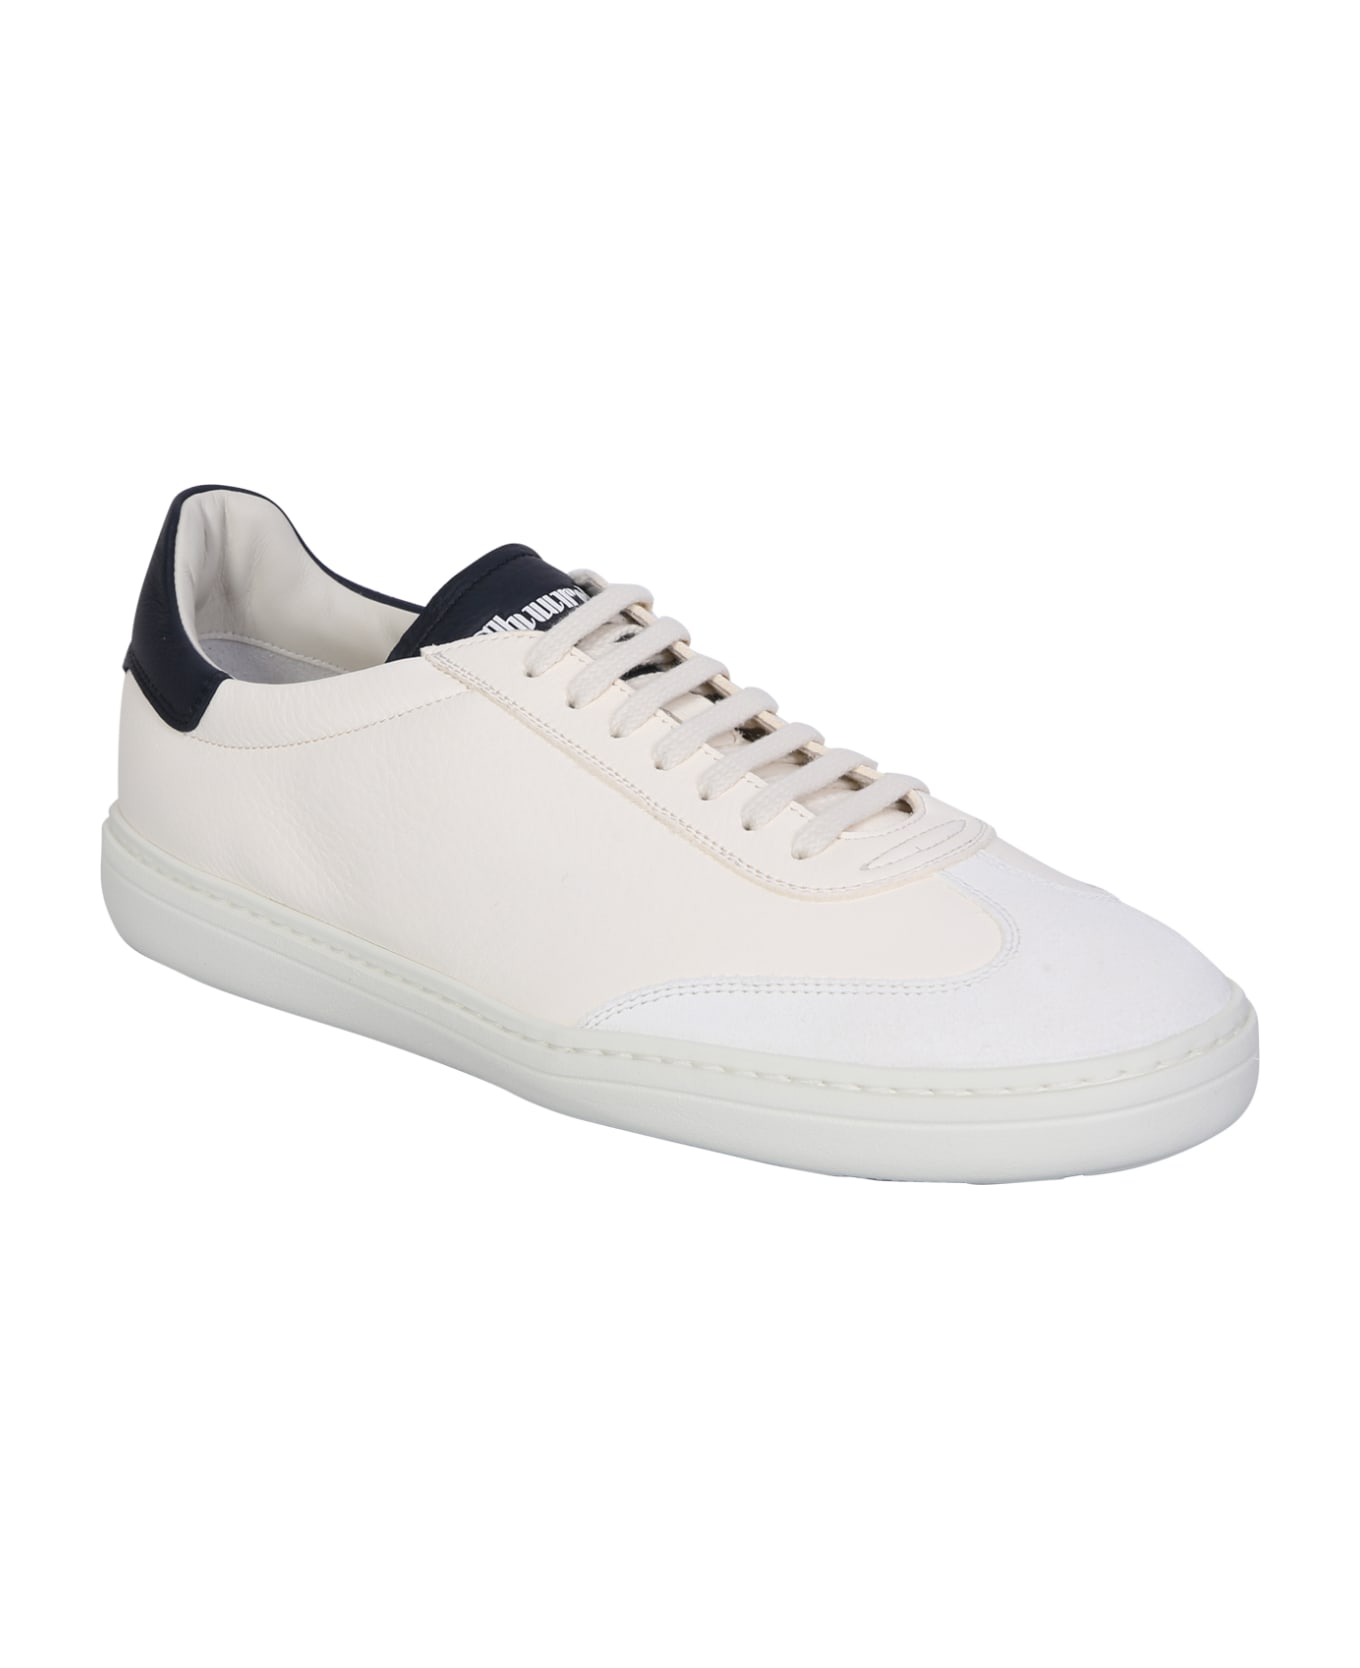 Church's Ivory Boland 2 Sneakers - White